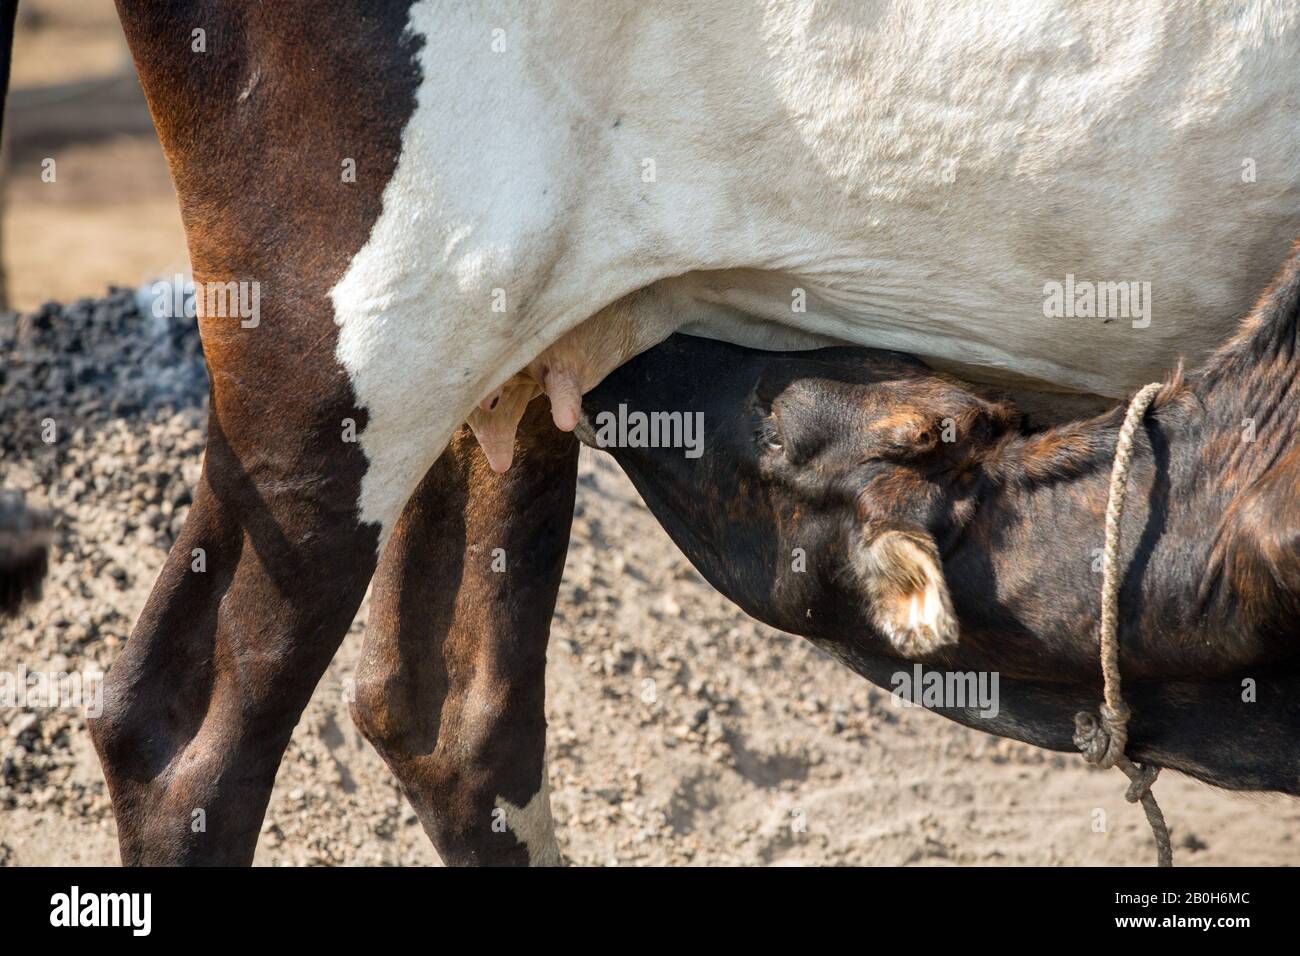 31.10.2019, Belinkum, Gambela, Ethiopia - Calf suckles on the udder of a cow. Cattle breeder of the Ethiopian ethnic group Nuer. Project documentation Stock Photo